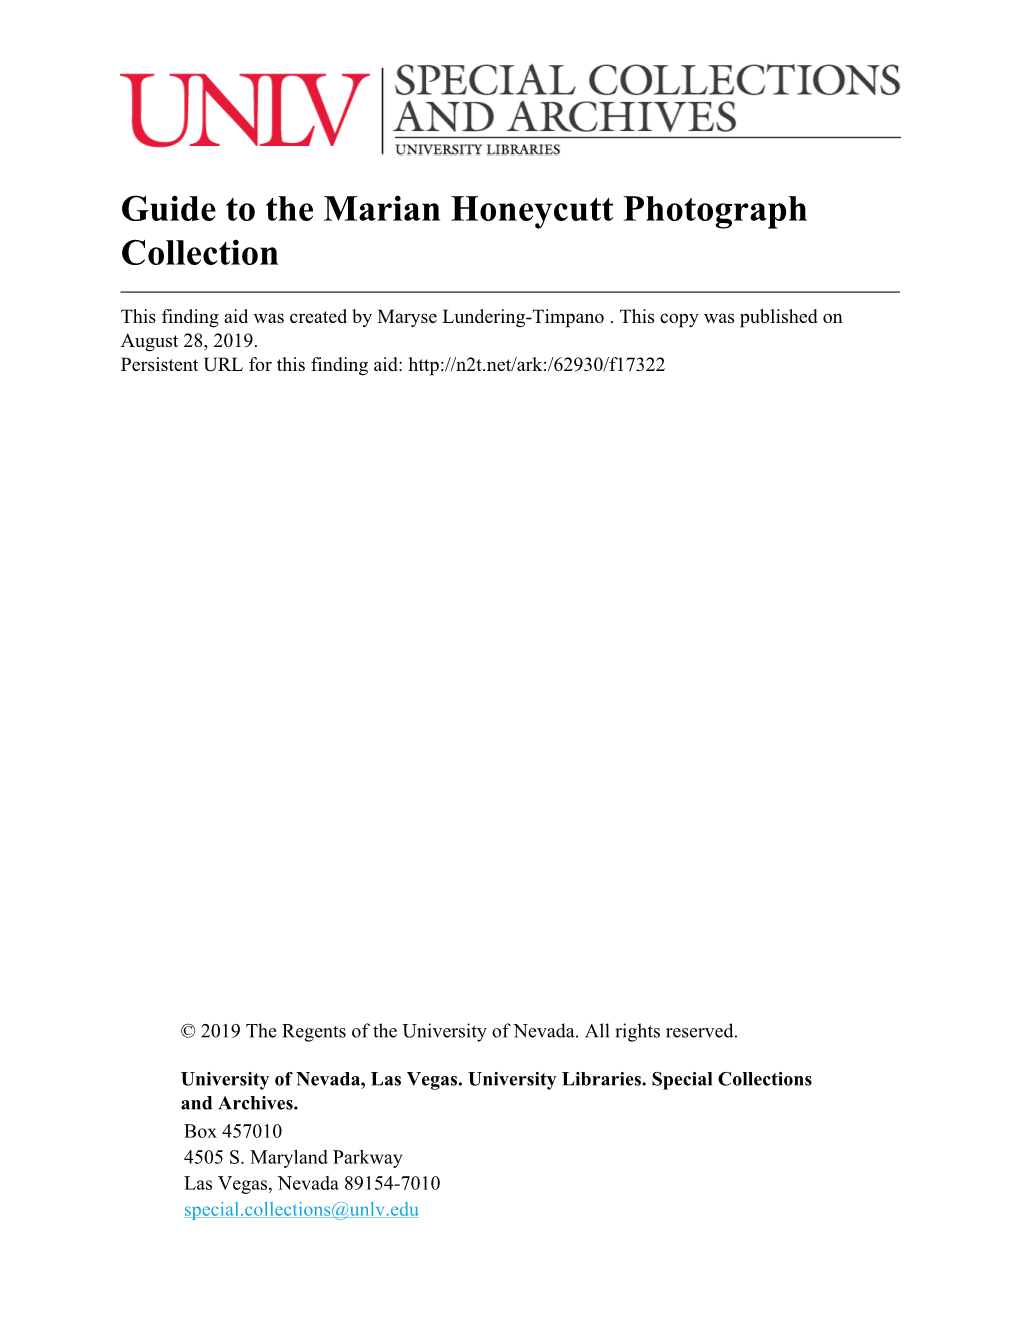 Guide to the Marian Honeycutt Photograph Collection